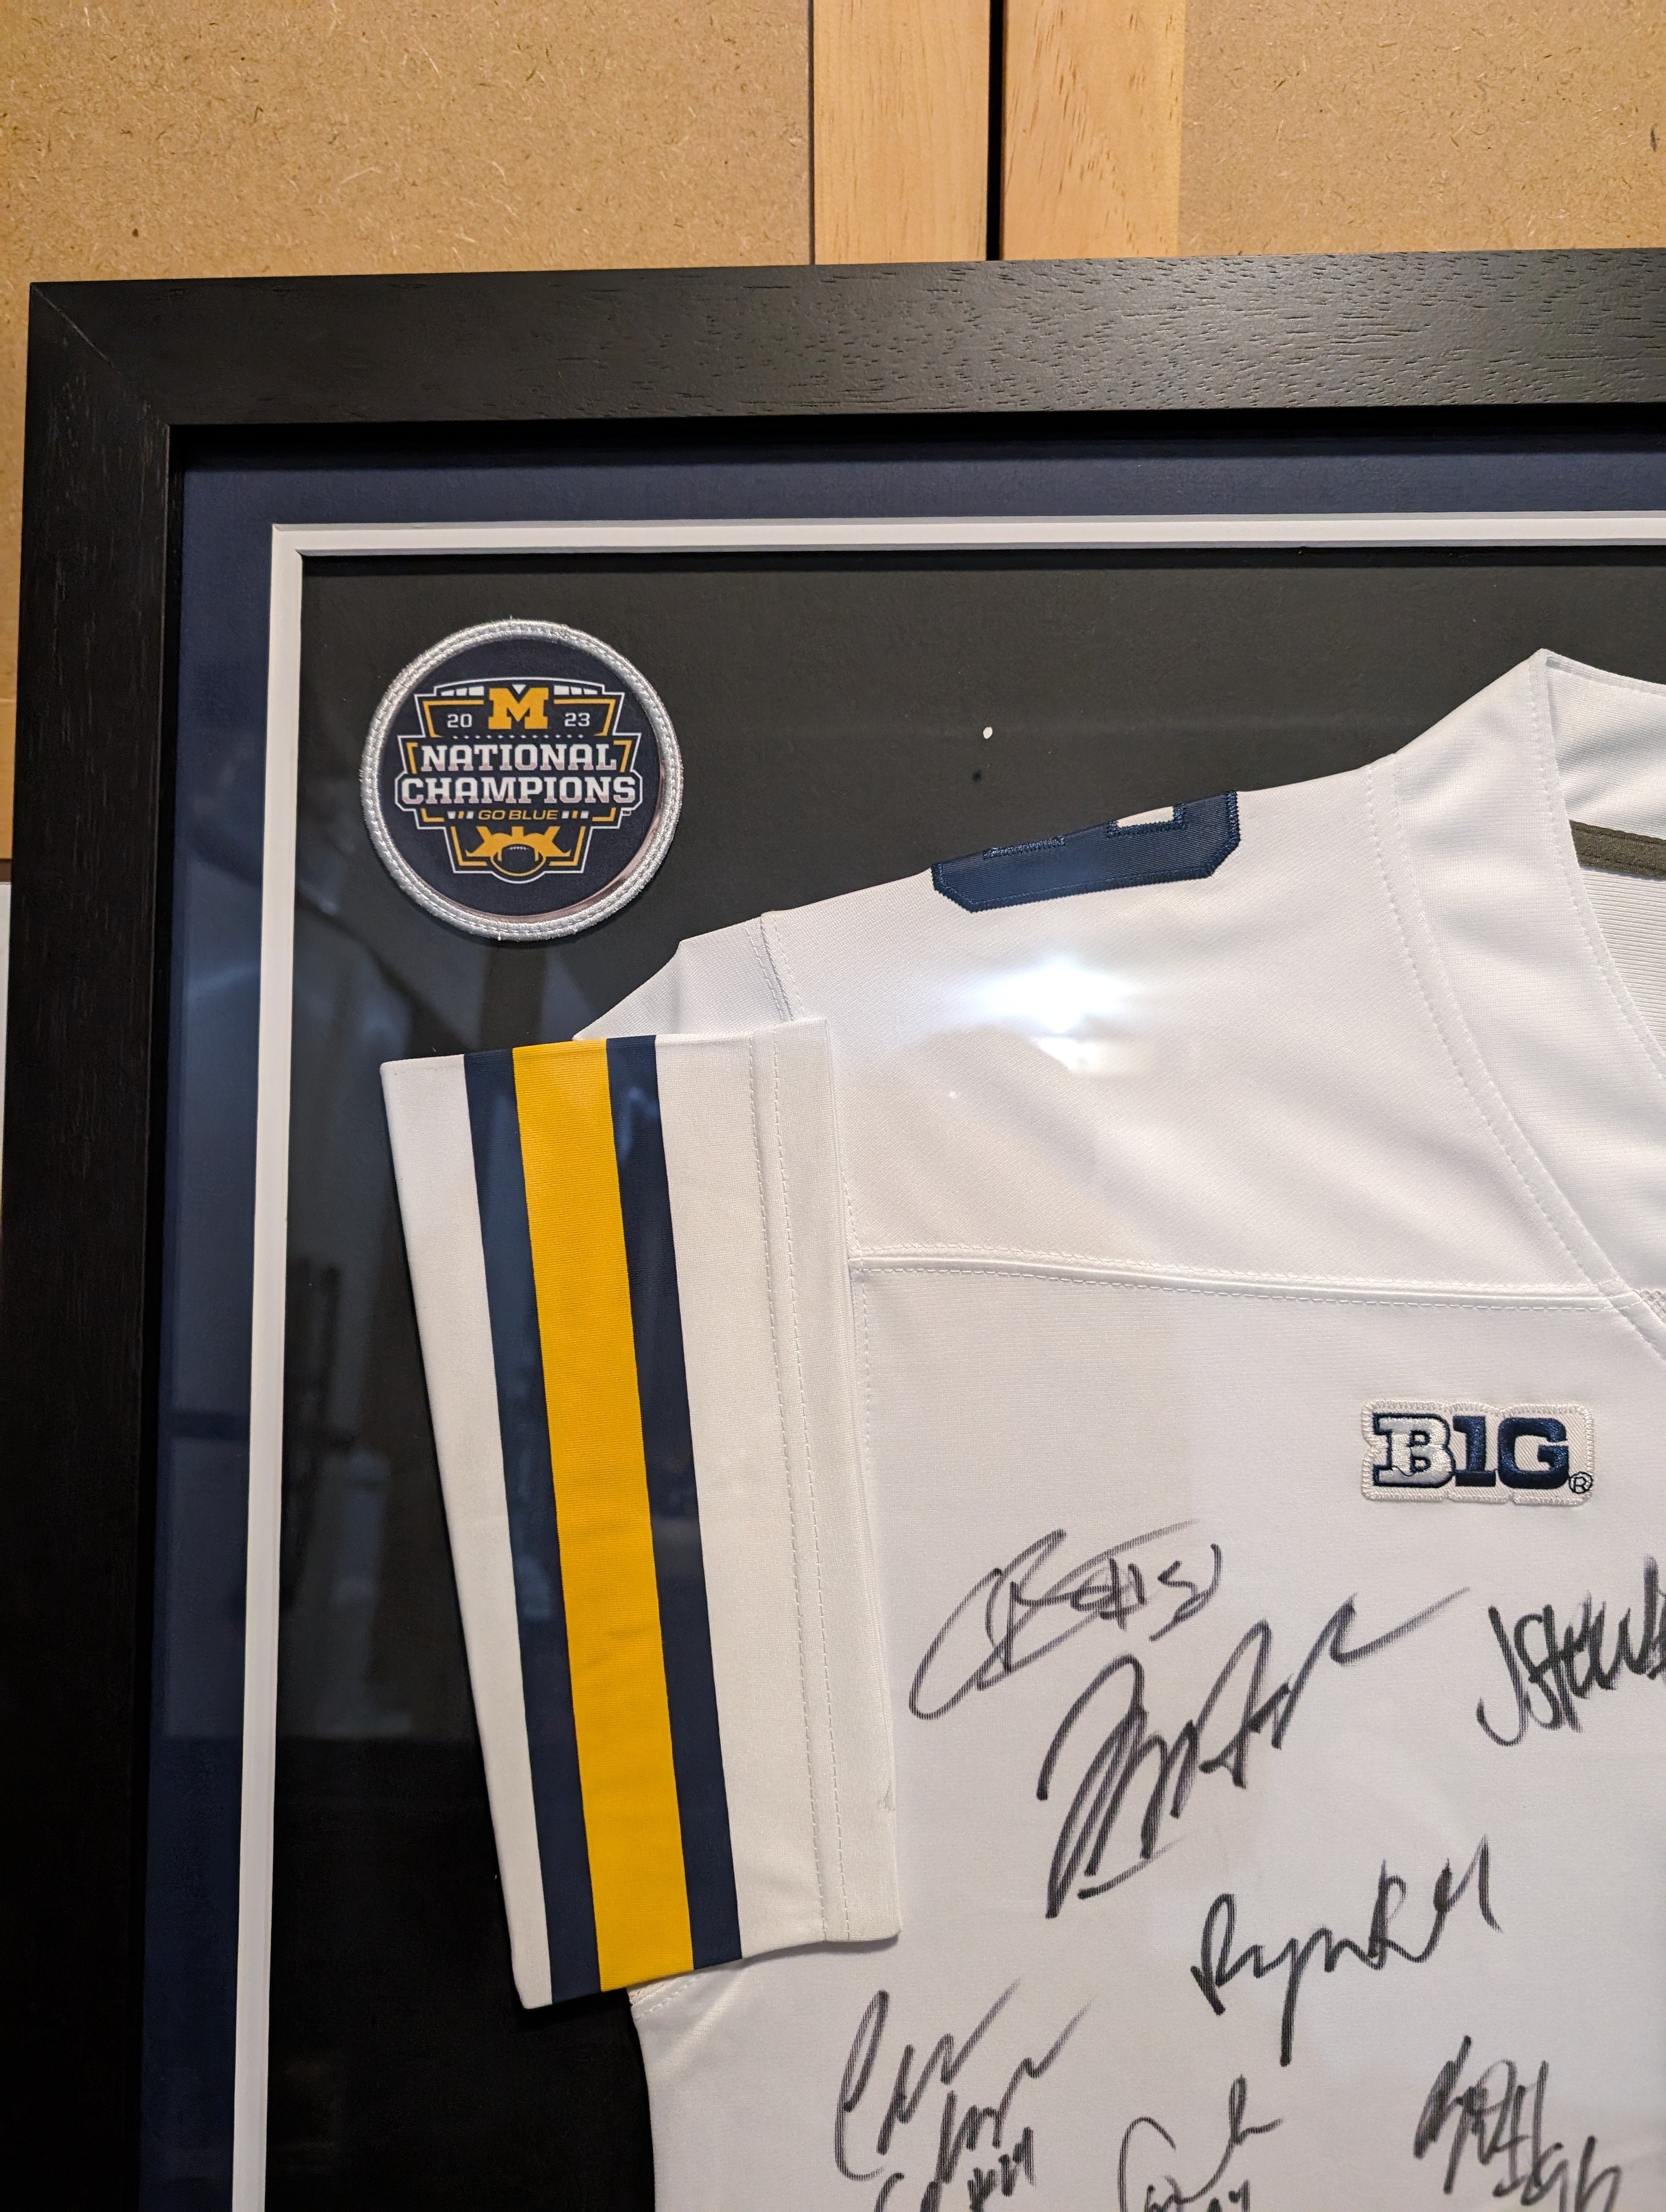 JJ McCarthy Jim Harbaugh Michigan Wolverines full team 2023 -24 National Champions team signed jersey with proof 42x32